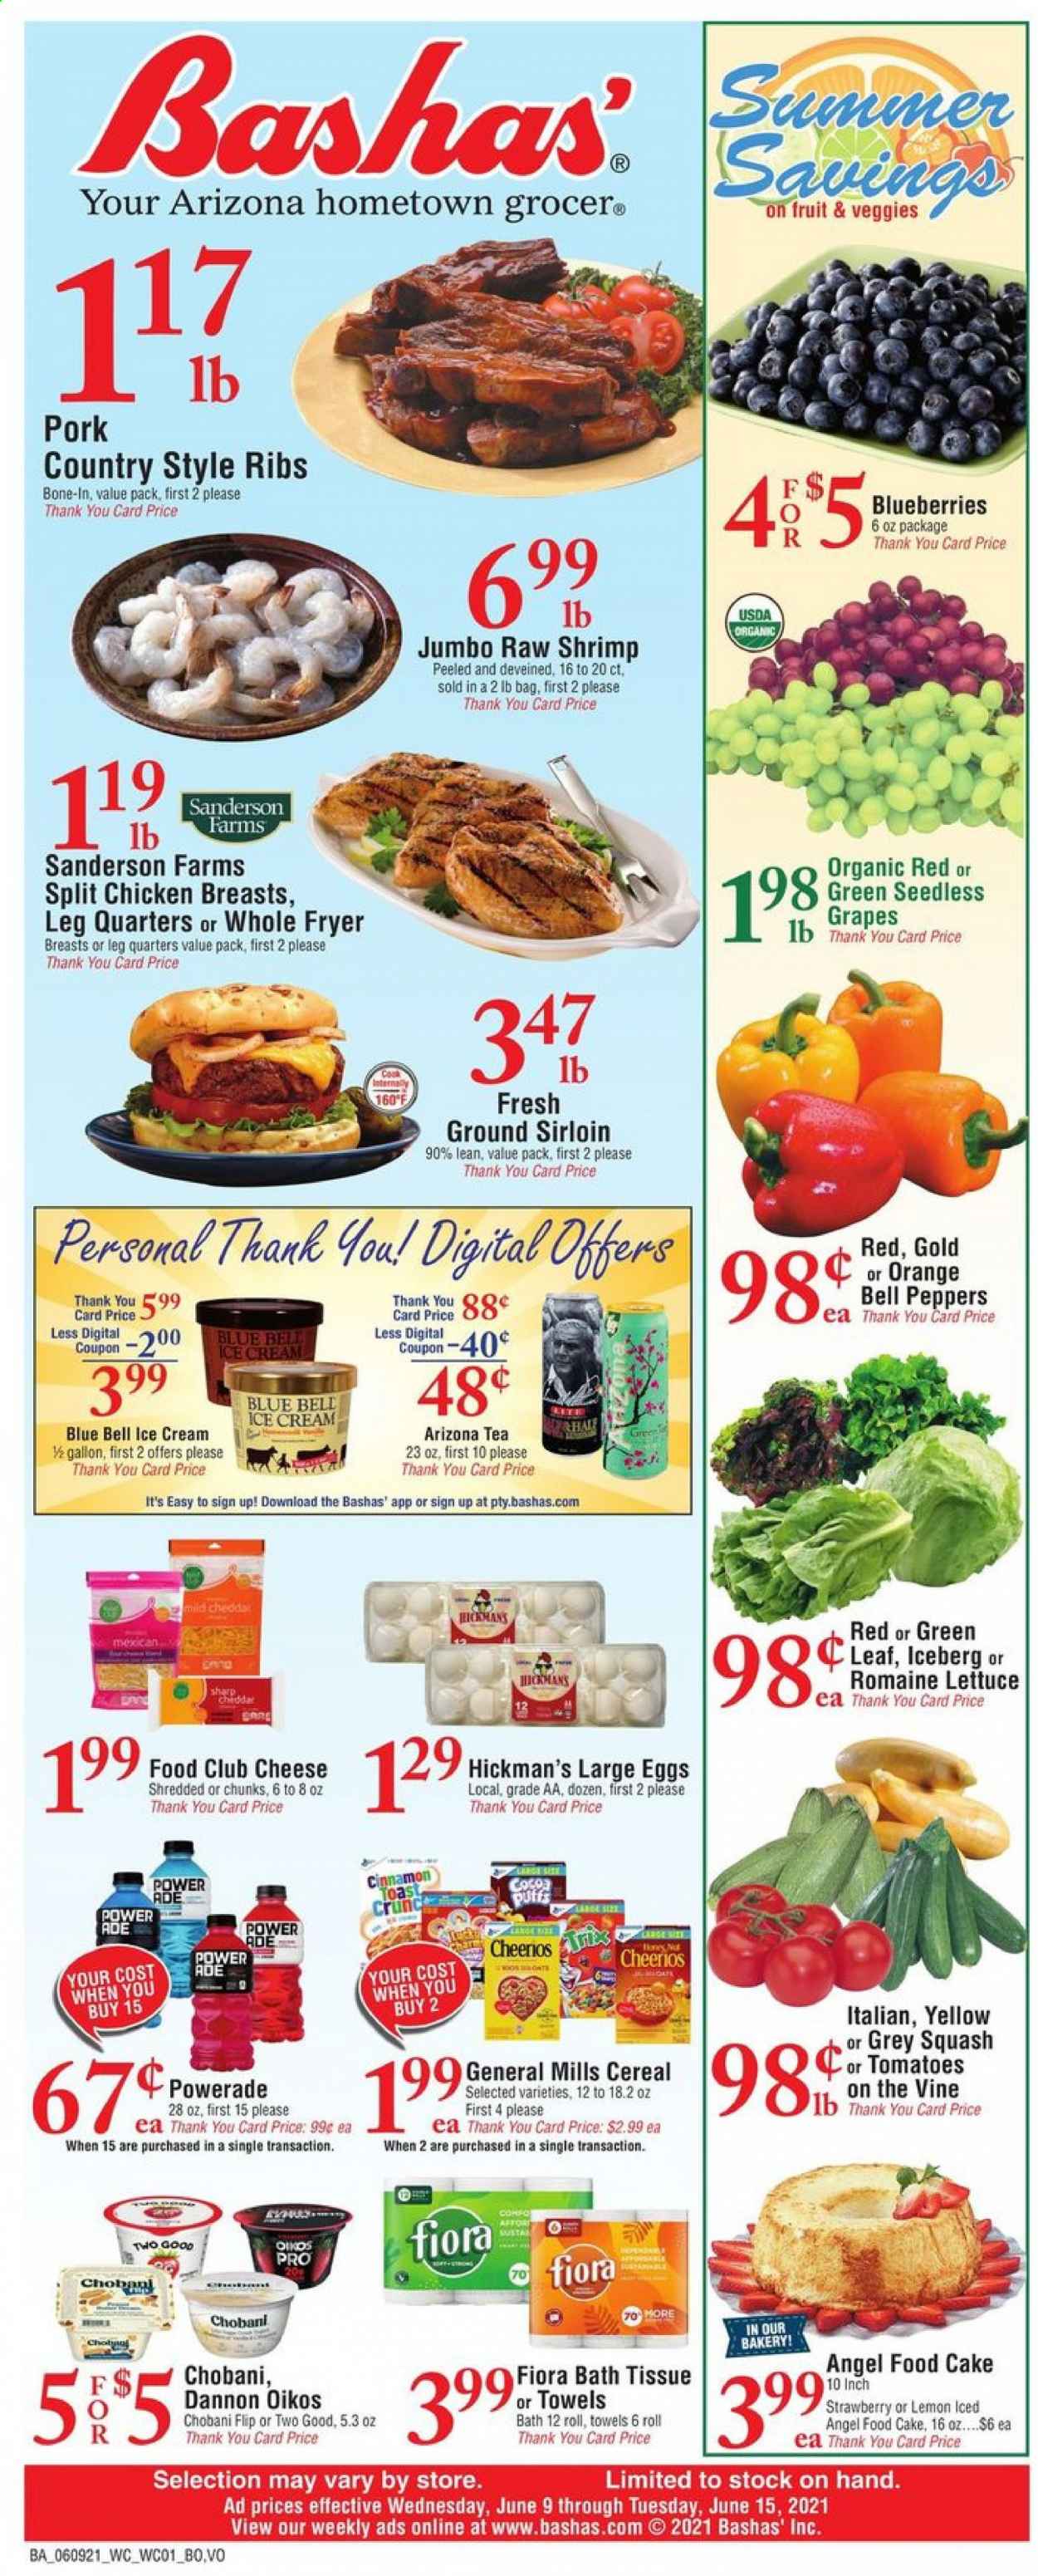 thumbnail - Bashas' Flyer - 06/09/2021 - 06/15/2021 - Sales products - cake, puffs, Angel Food, bell peppers, tomatoes, lettuce, peppers, blueberries, grapes, oranges, shrimps, cheese, Oikos, Chobani, Dannon, large eggs, ice cream, Blue Bell, cereals, Cheerios, Trix, cinnamon, Powerade, tea, chicken breasts, pork ribs, country style ribs, bath tissue. Page 1.